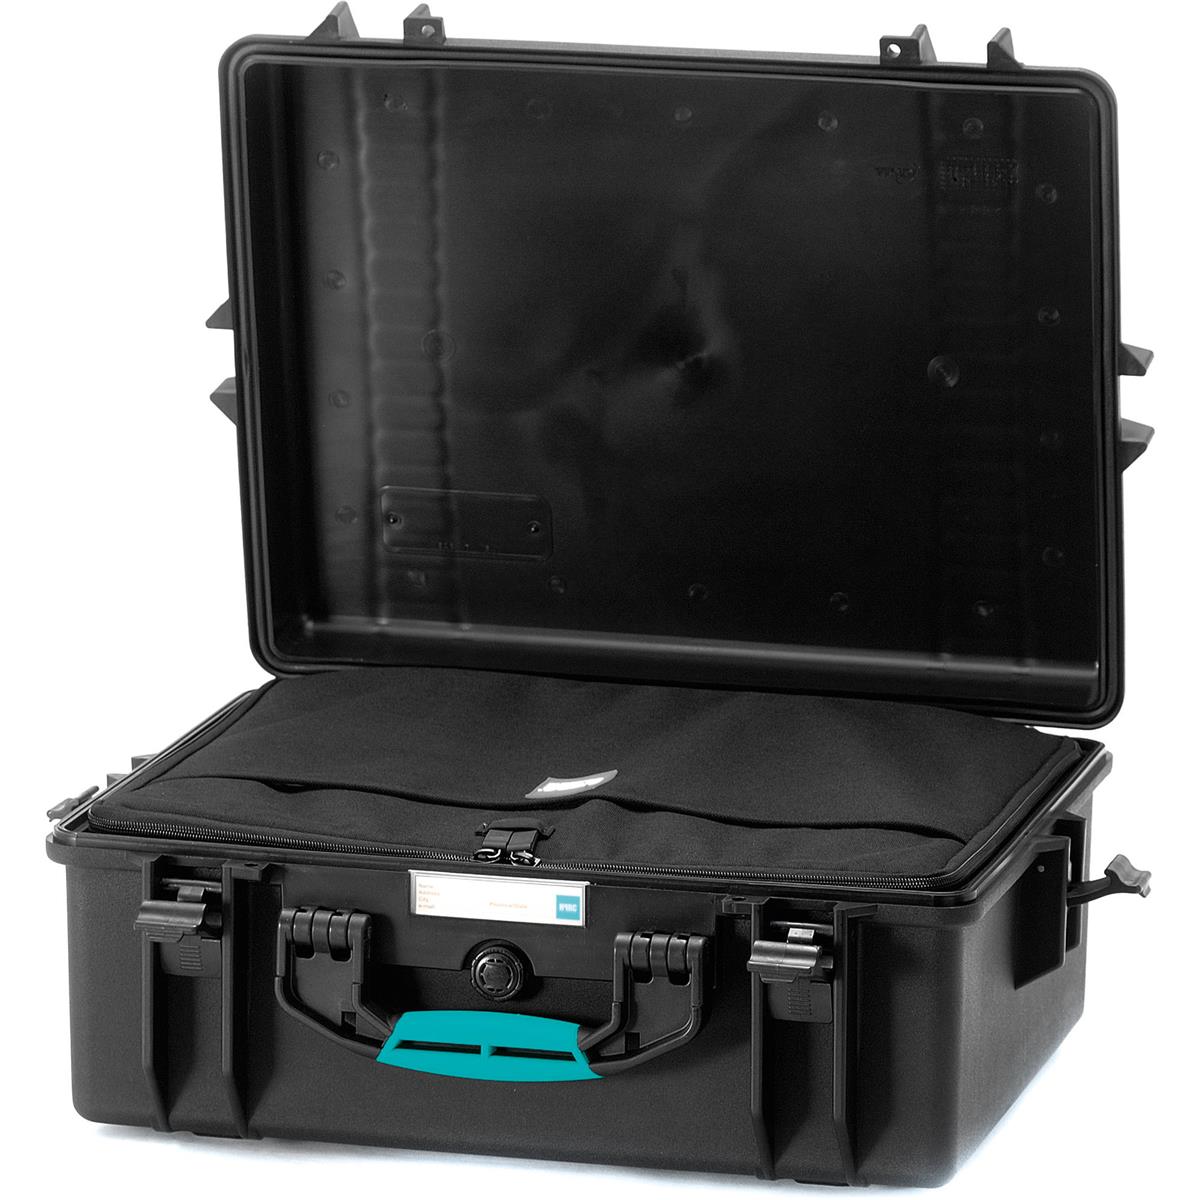 Image of HPRC 2600 Waterproof Hard Case with Internal Soft Case